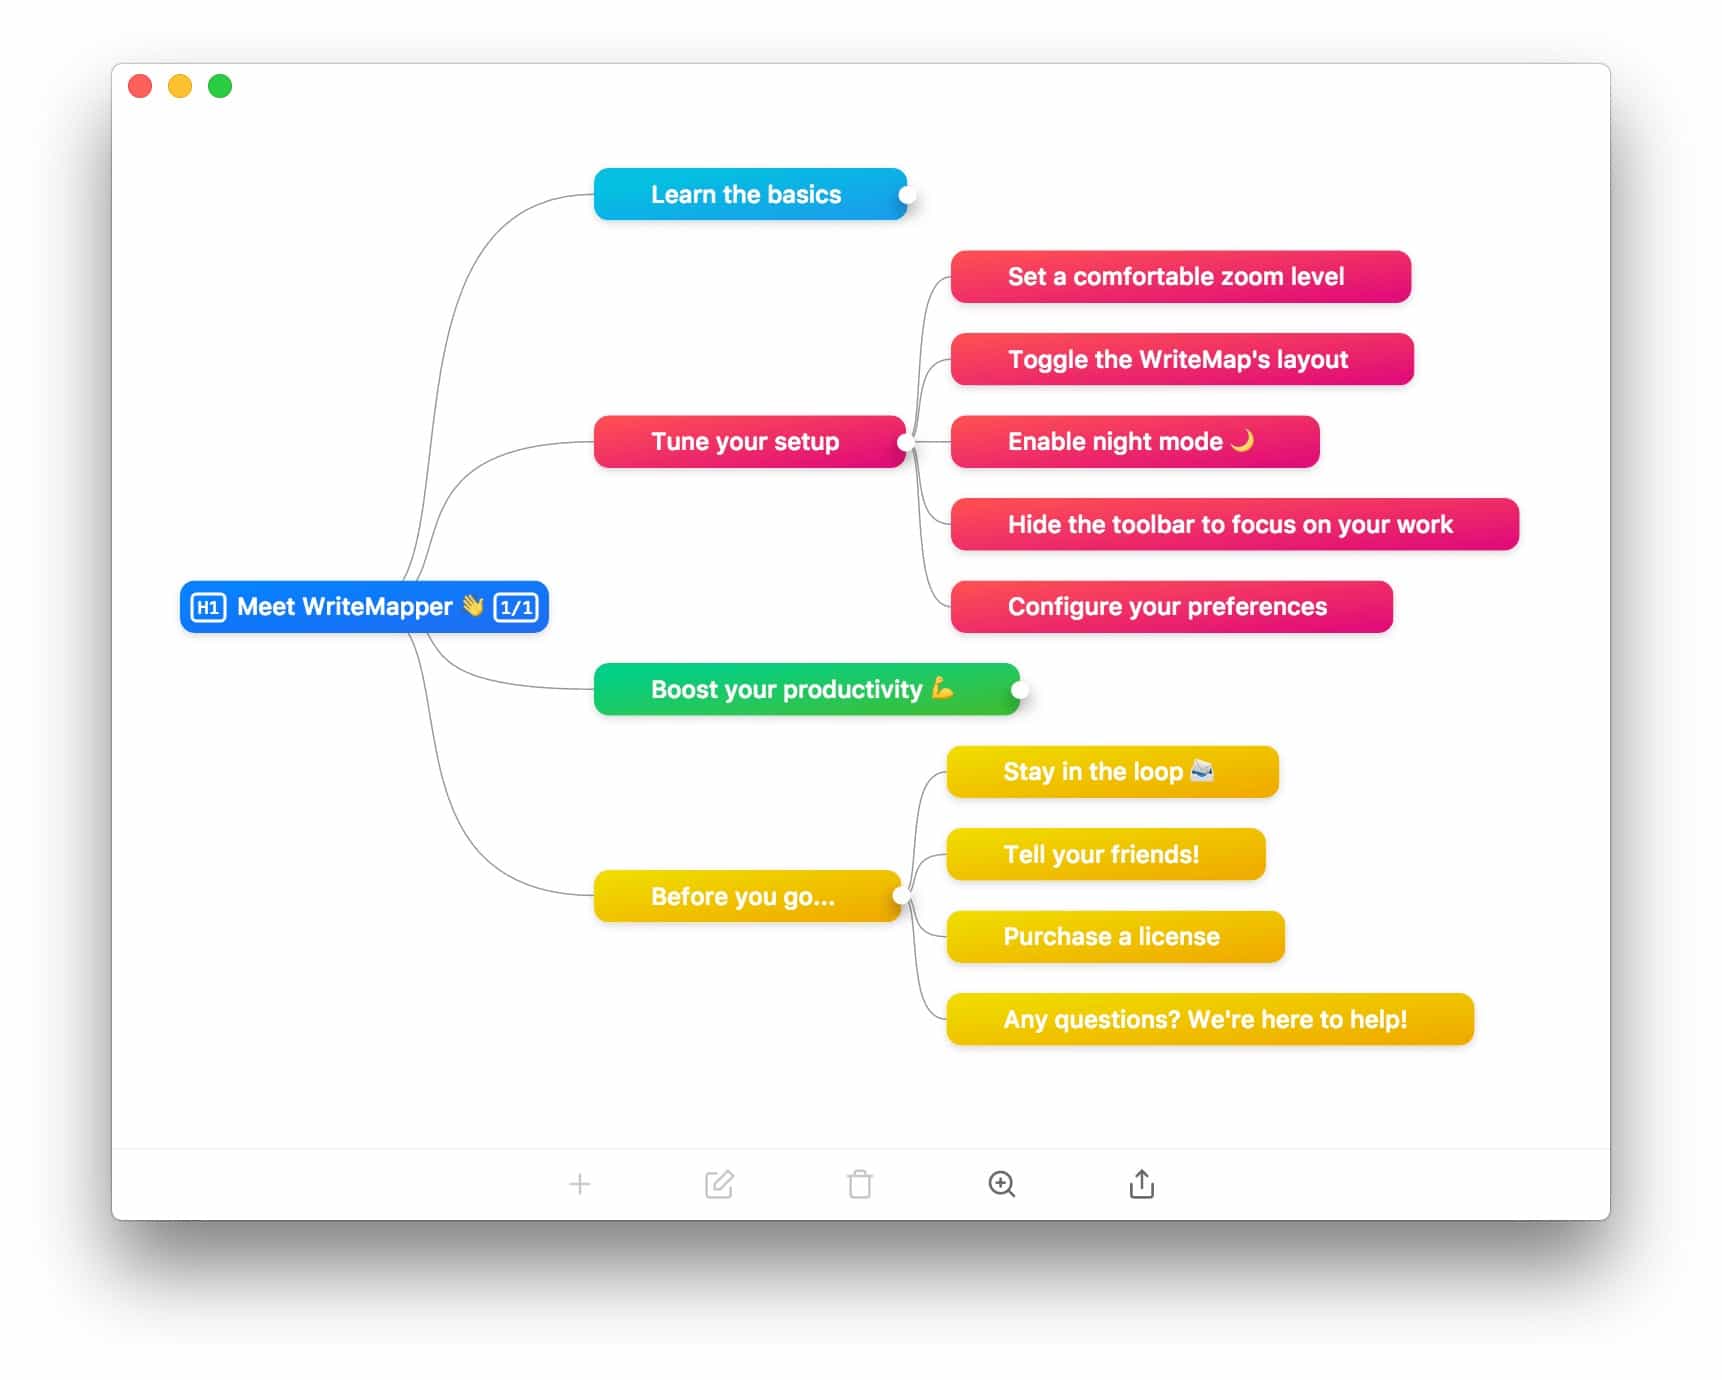 Even the mind-map is beautiful.